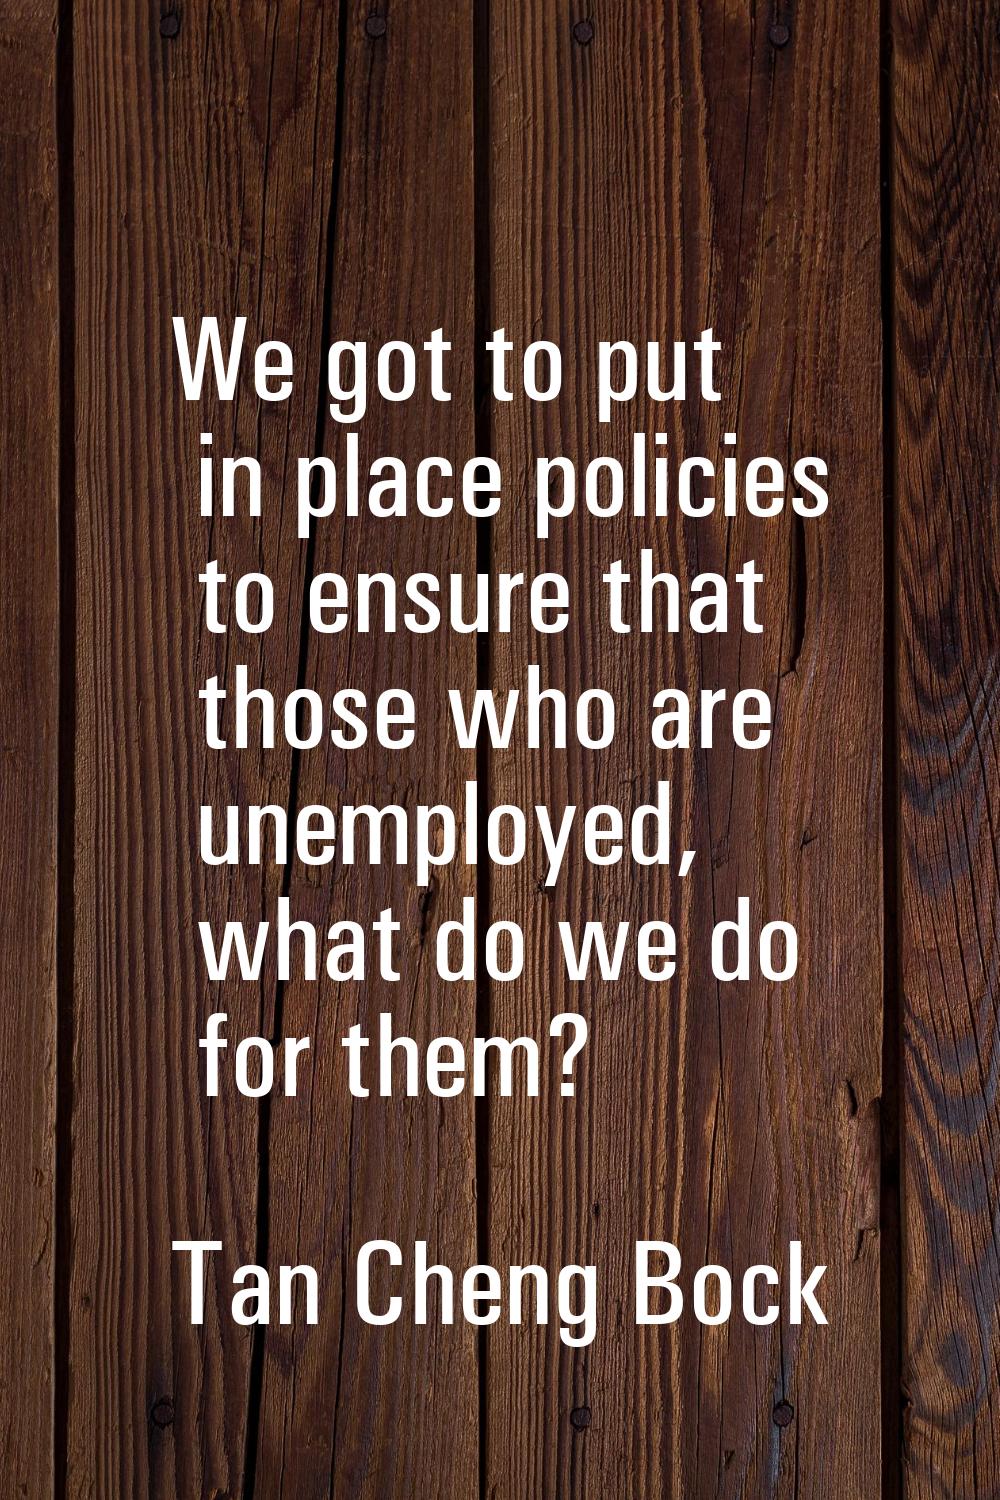 We got to put in place policies to ensure that those who are unemployed, what do we do for them?